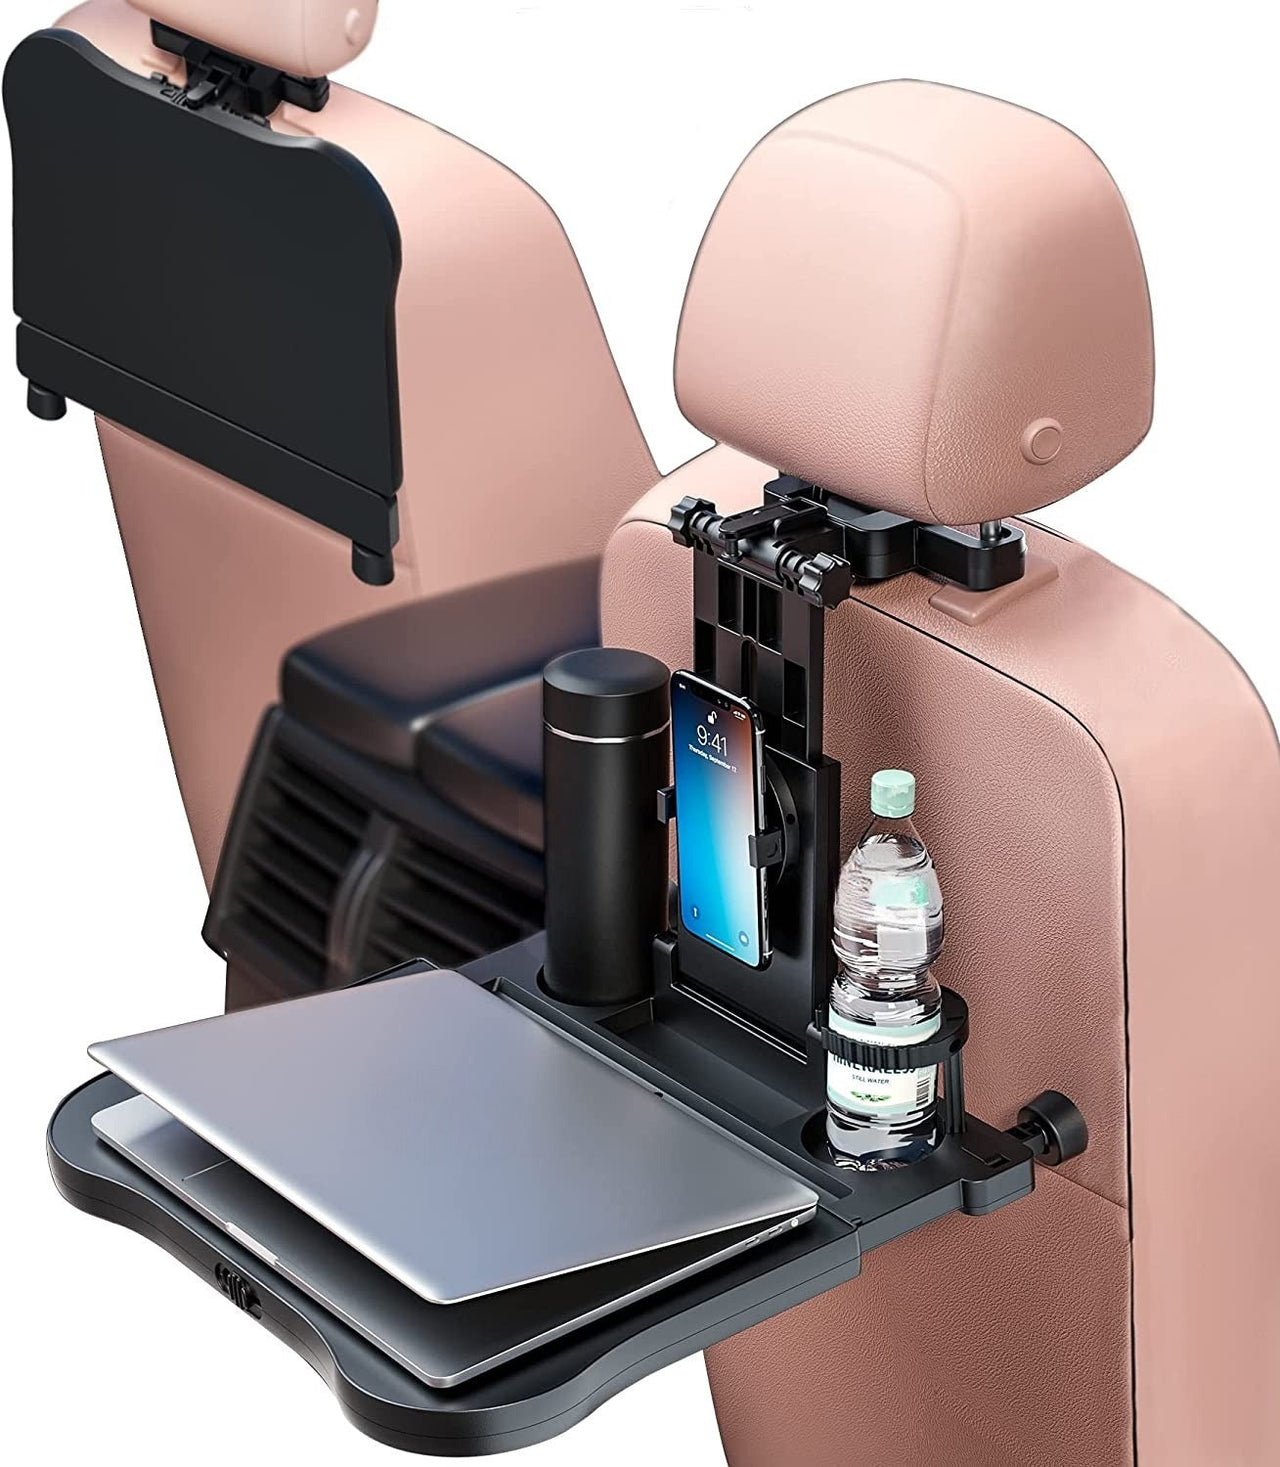 Car Backseat Tray Table, Foldable Tray Seat Back Laptop Desk for Car Travel, Multifunctional Car Back Seat Food Tray, Car Table with Phone Holder, for Working, Writing, Eating, Traveling